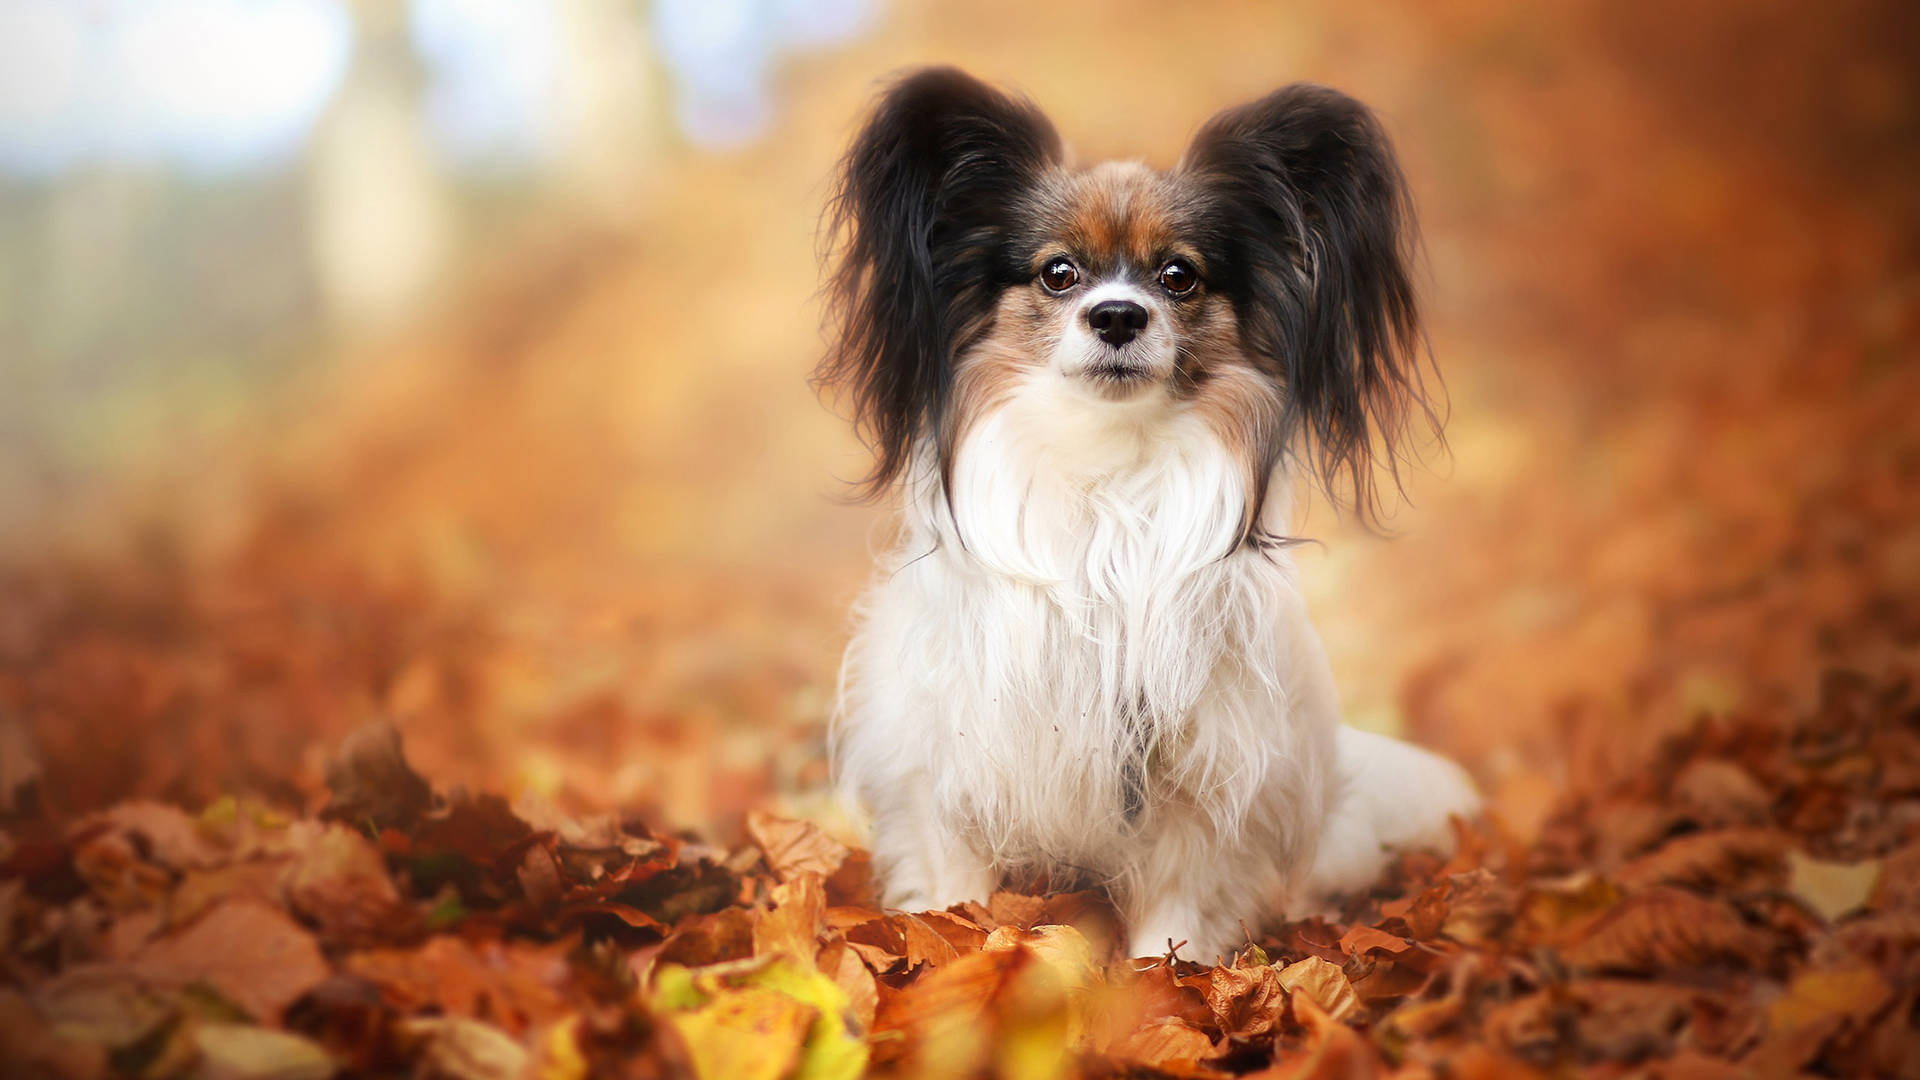 Cute Papillon Dog On Autumn Leaves Background